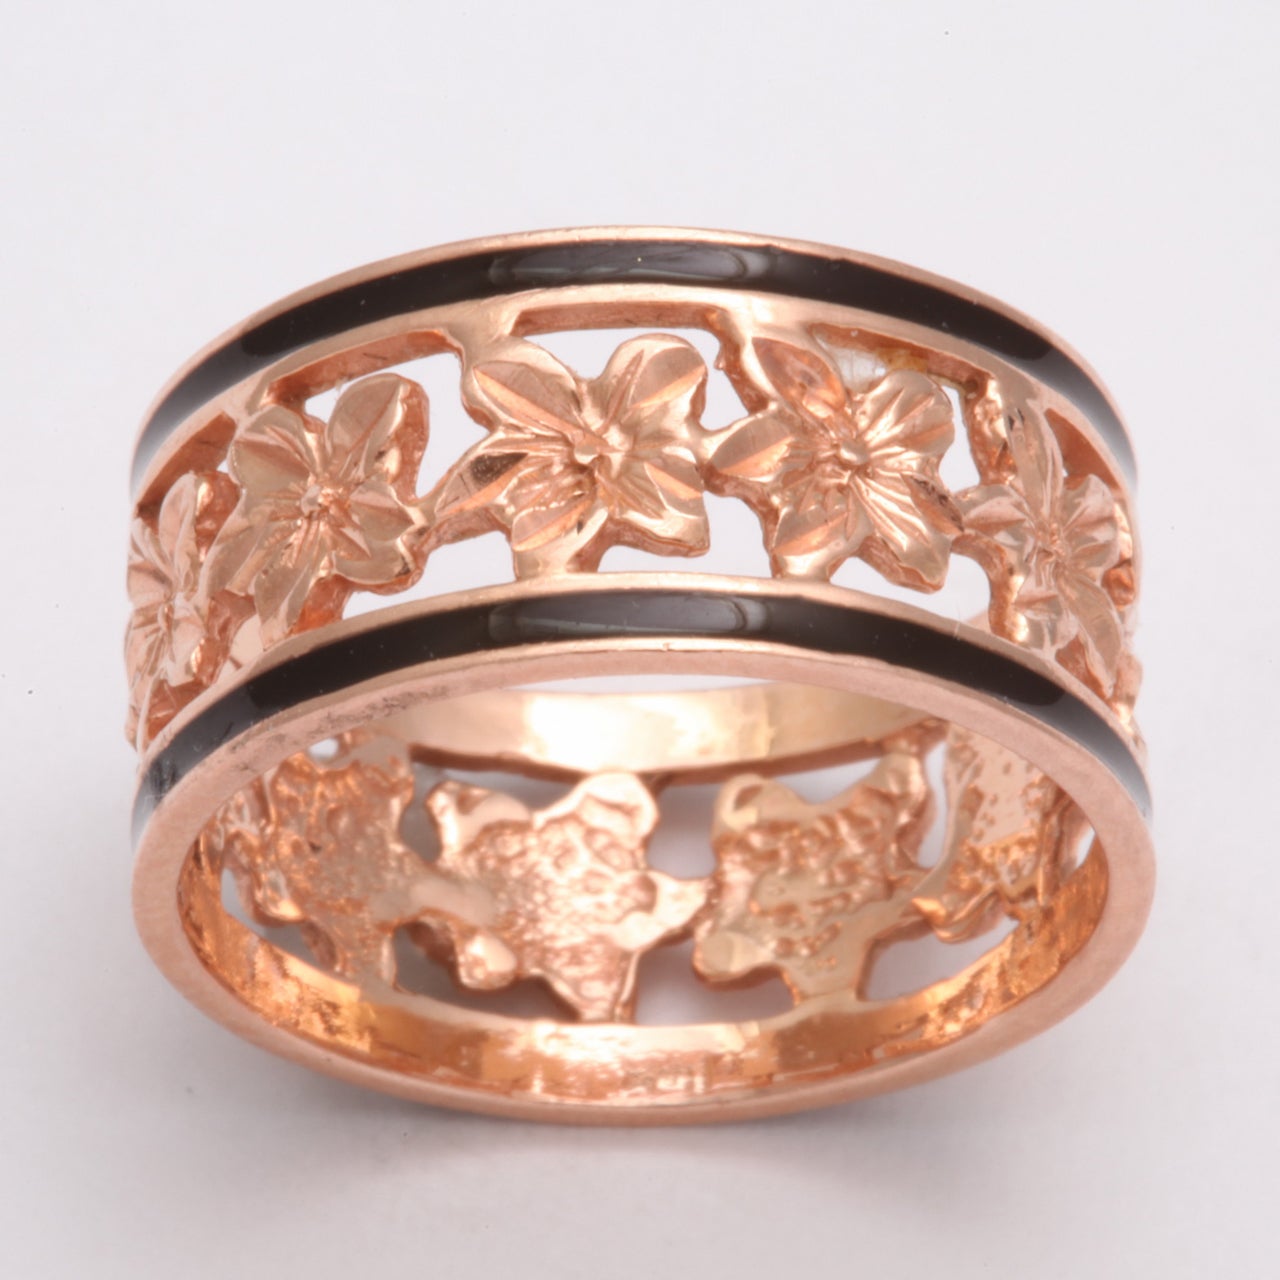 A band ring made in the United States in 14 Kt gold wraps ivy leaves around the finger. Ivy clings and intertwines in endless attachment which makes this a meaningful ring for lovers. The borders are emboldened with black enamel giving definition to